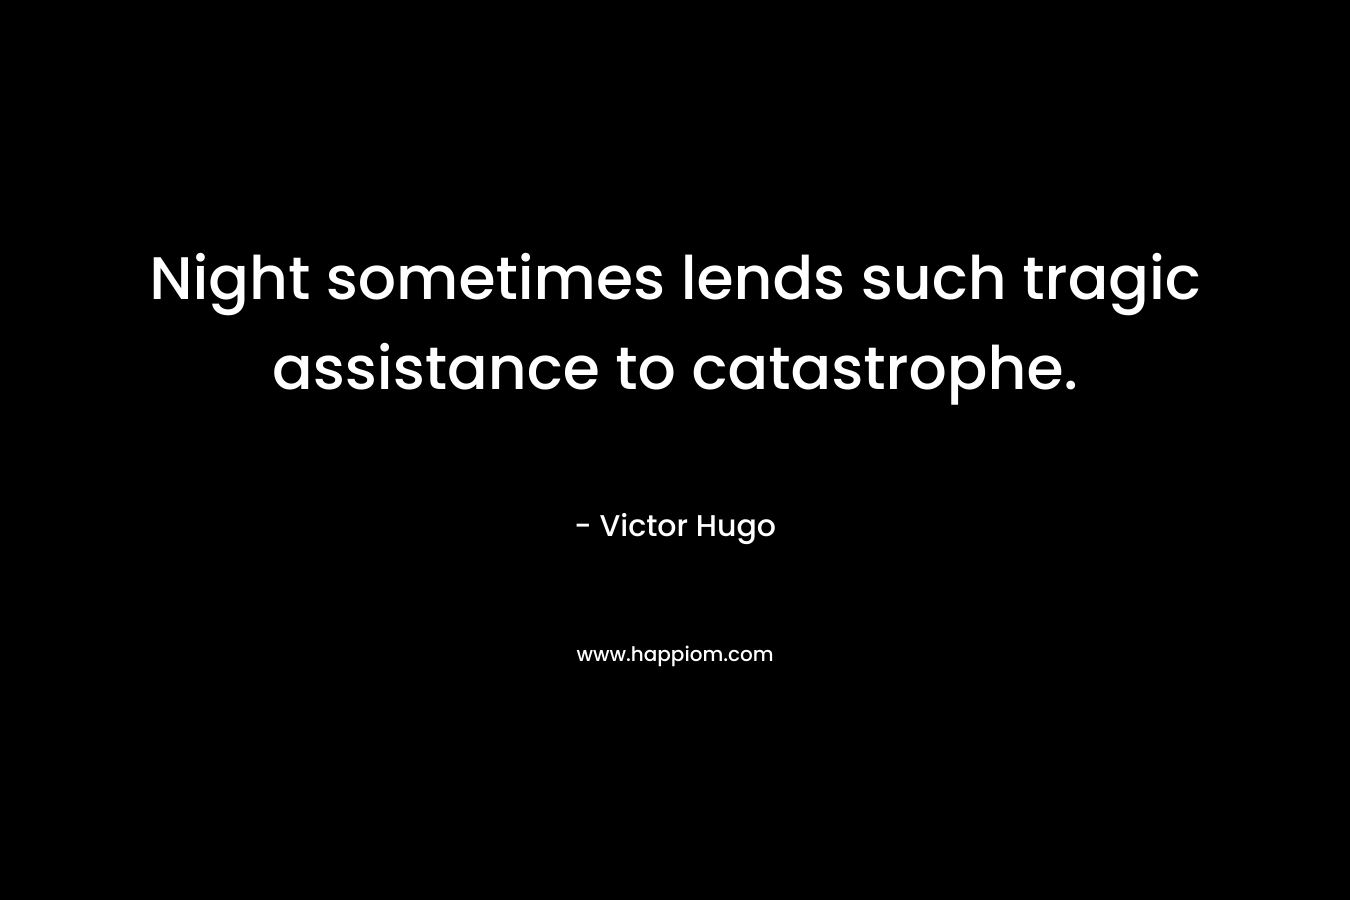 Night sometimes lends such tragic assistance to catastrophe. – Victor Hugo